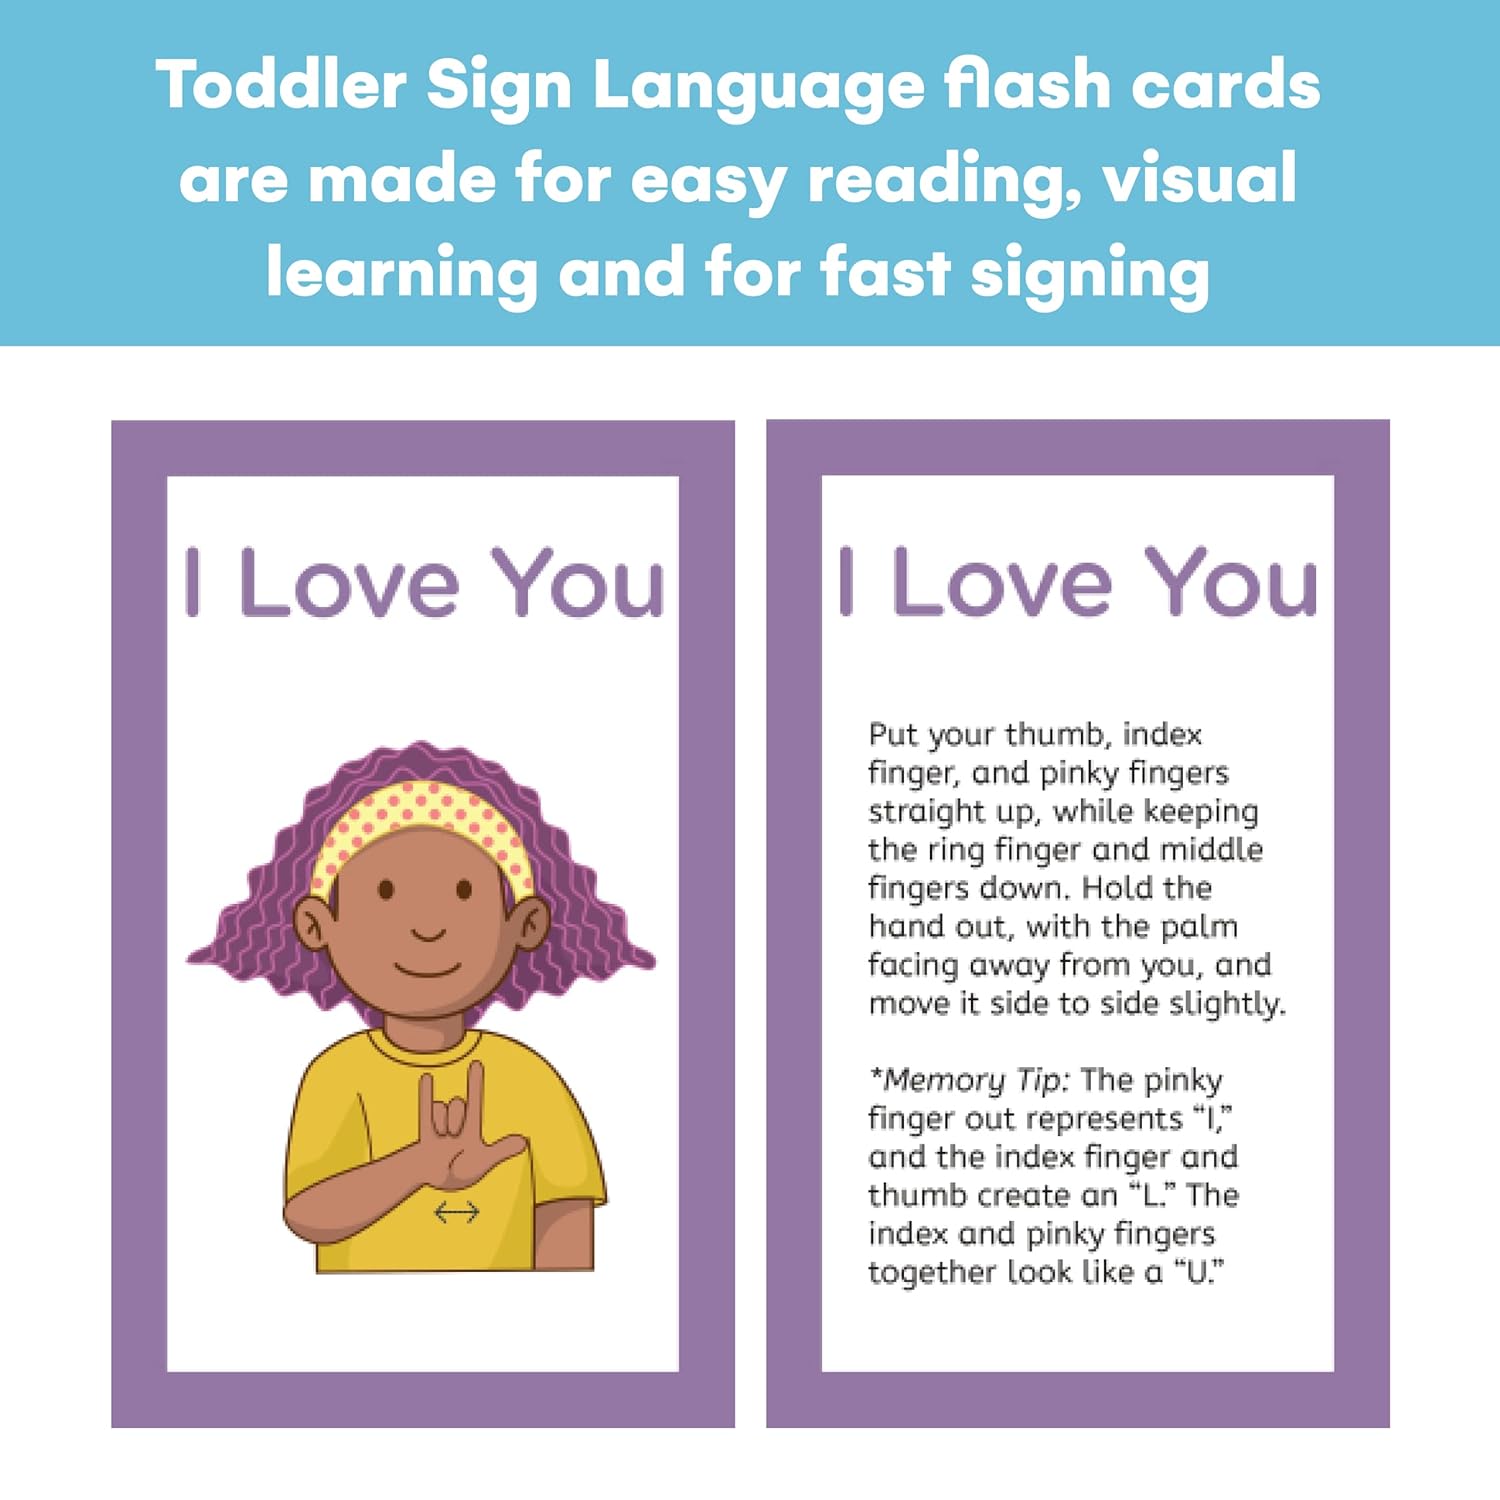 Alpine Choice ASL Cards: A Visual Aid for Developing Empathy and Communication Skills